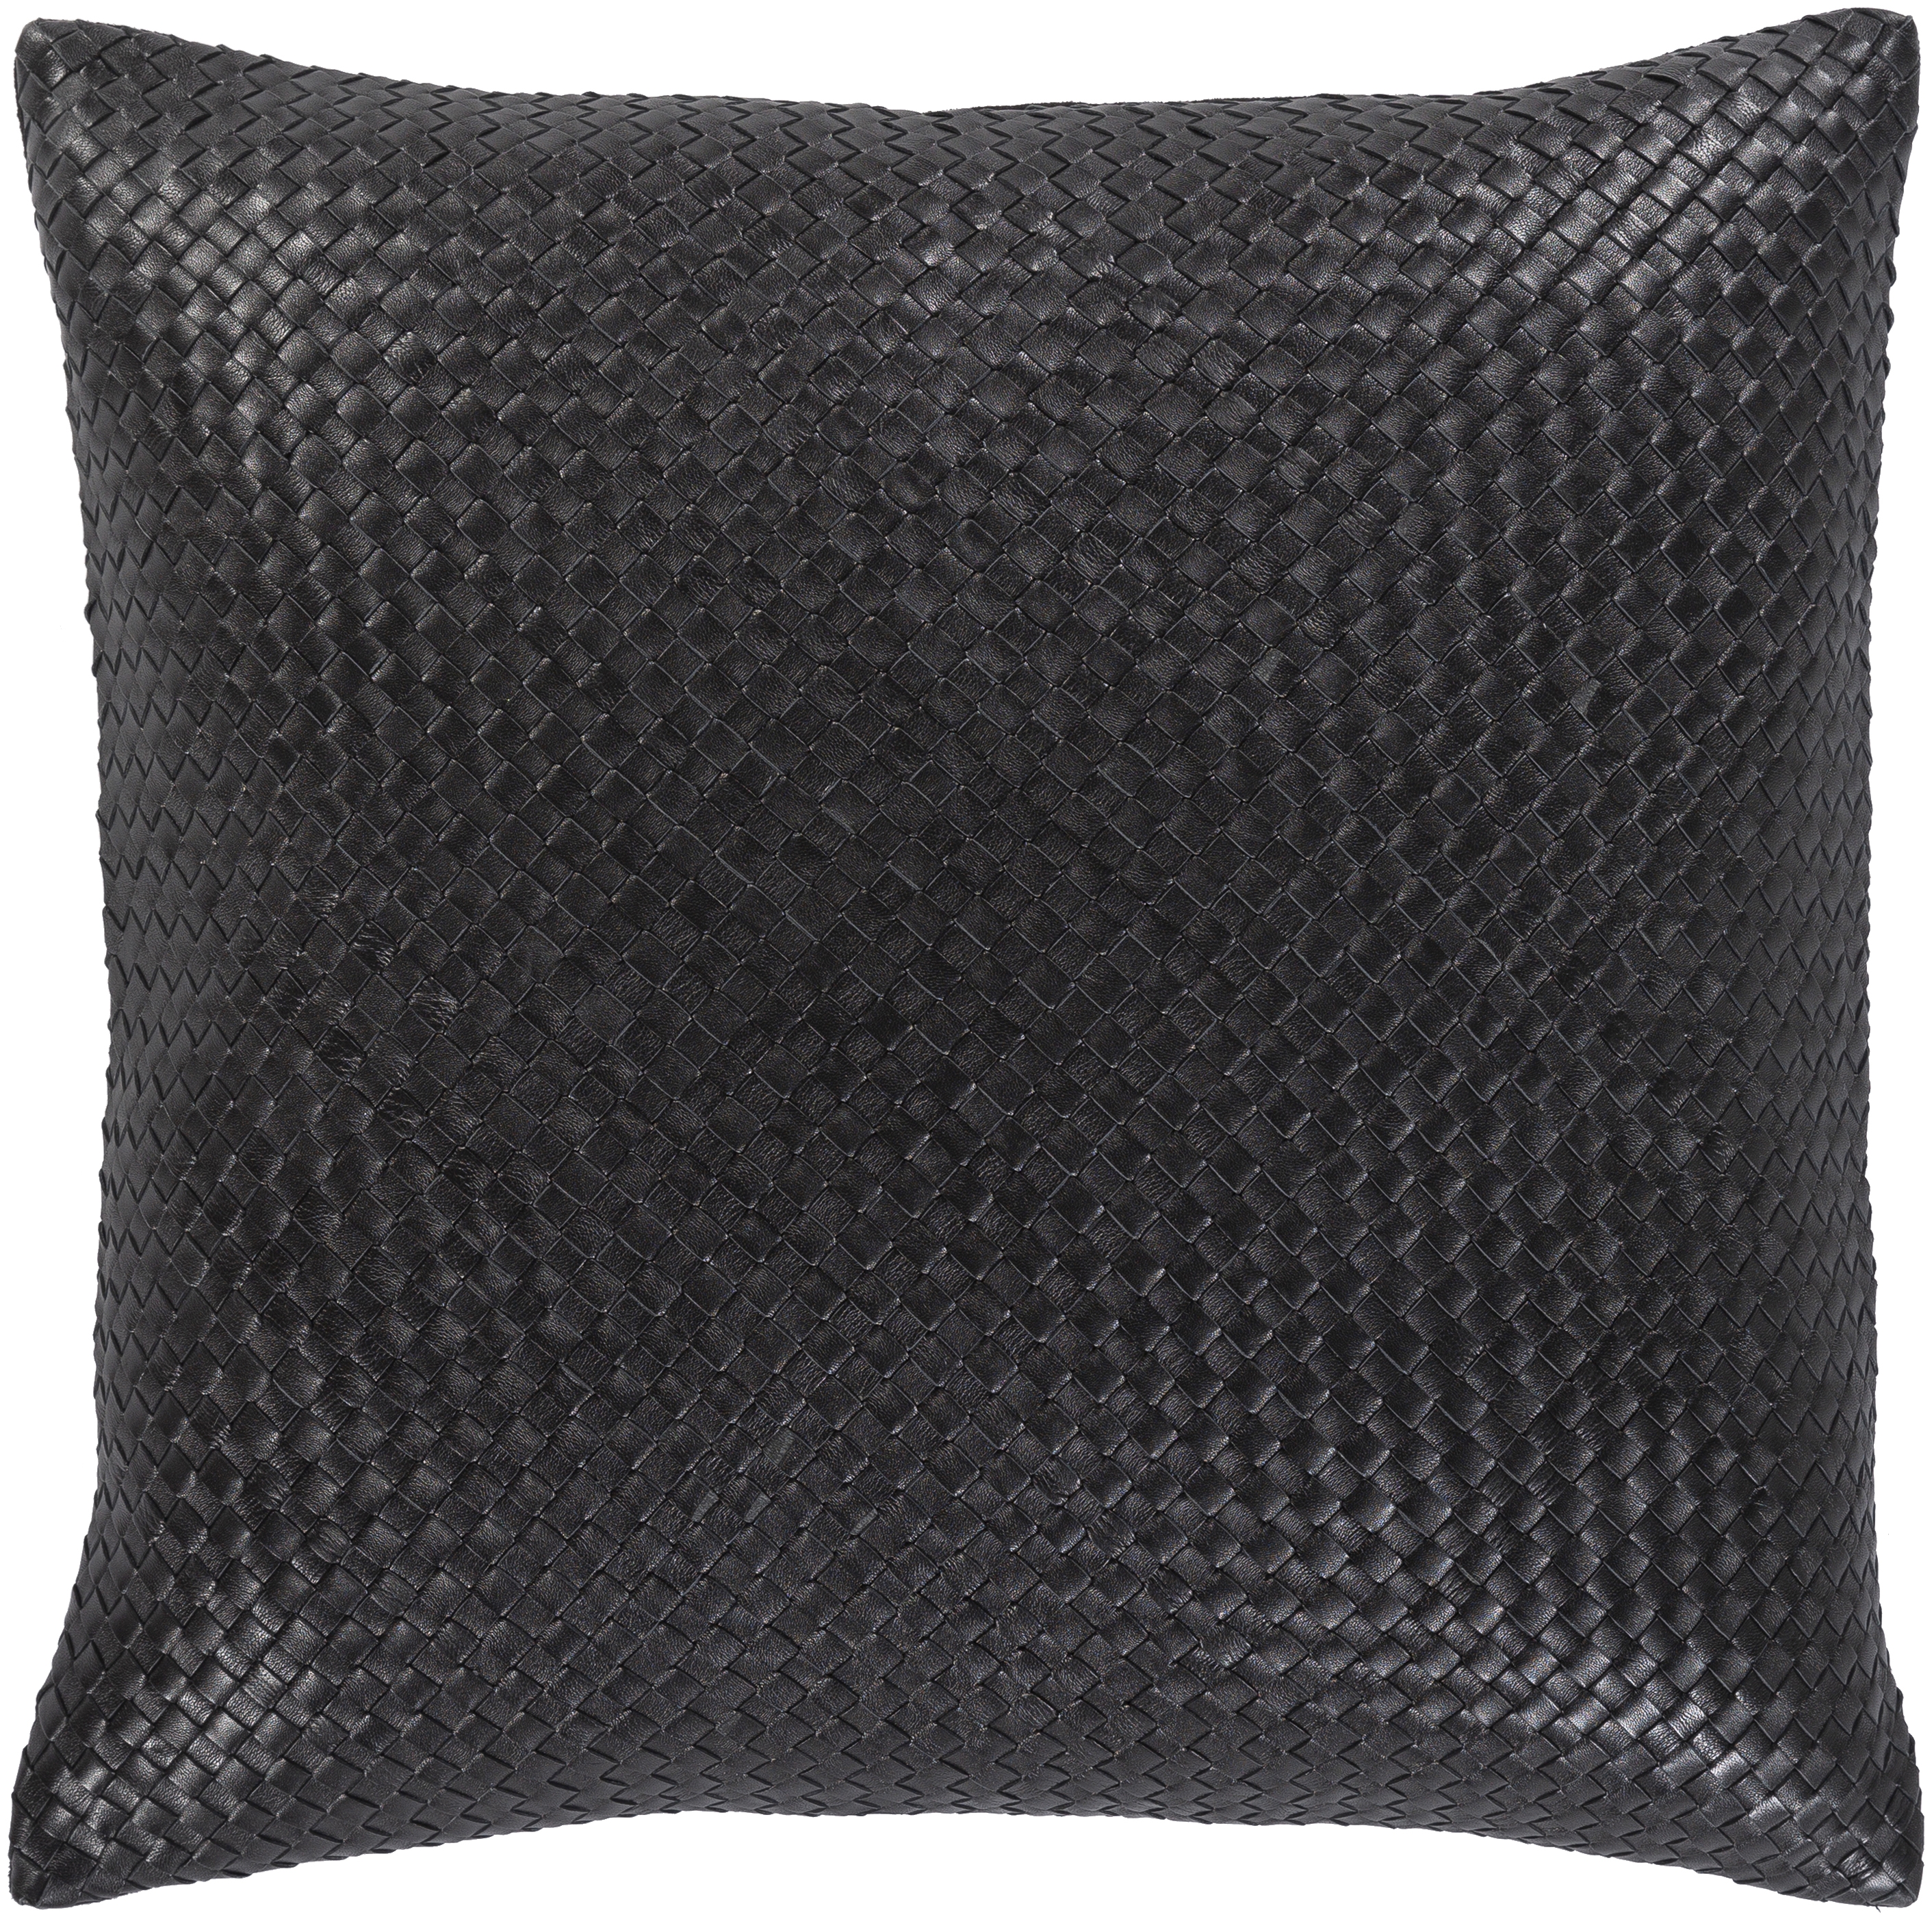 Onyx Throw Pillow, 20" x 20", pillow cover only - Image 0